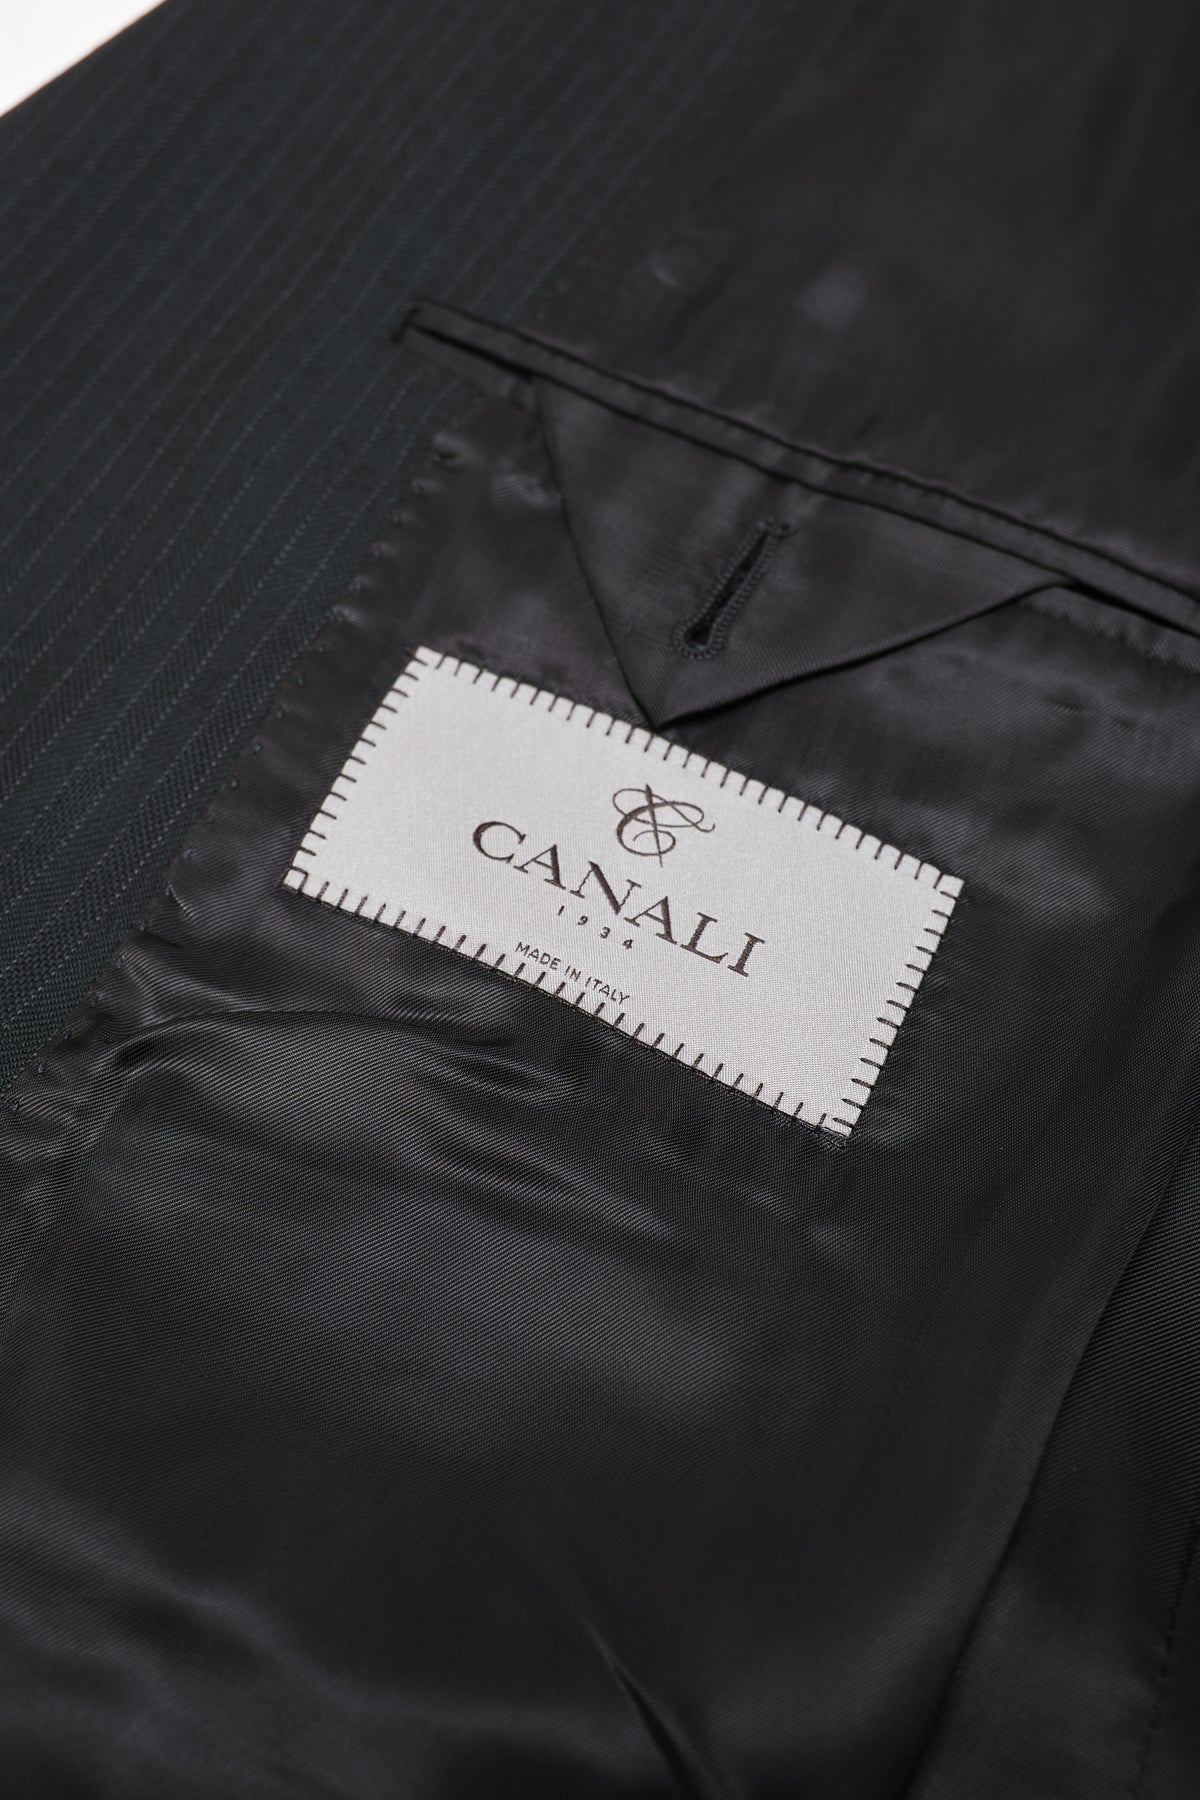 Canali 1934 Mens Black Pinstriped 44R Drop 6 100% Wool 2 Piece Suit